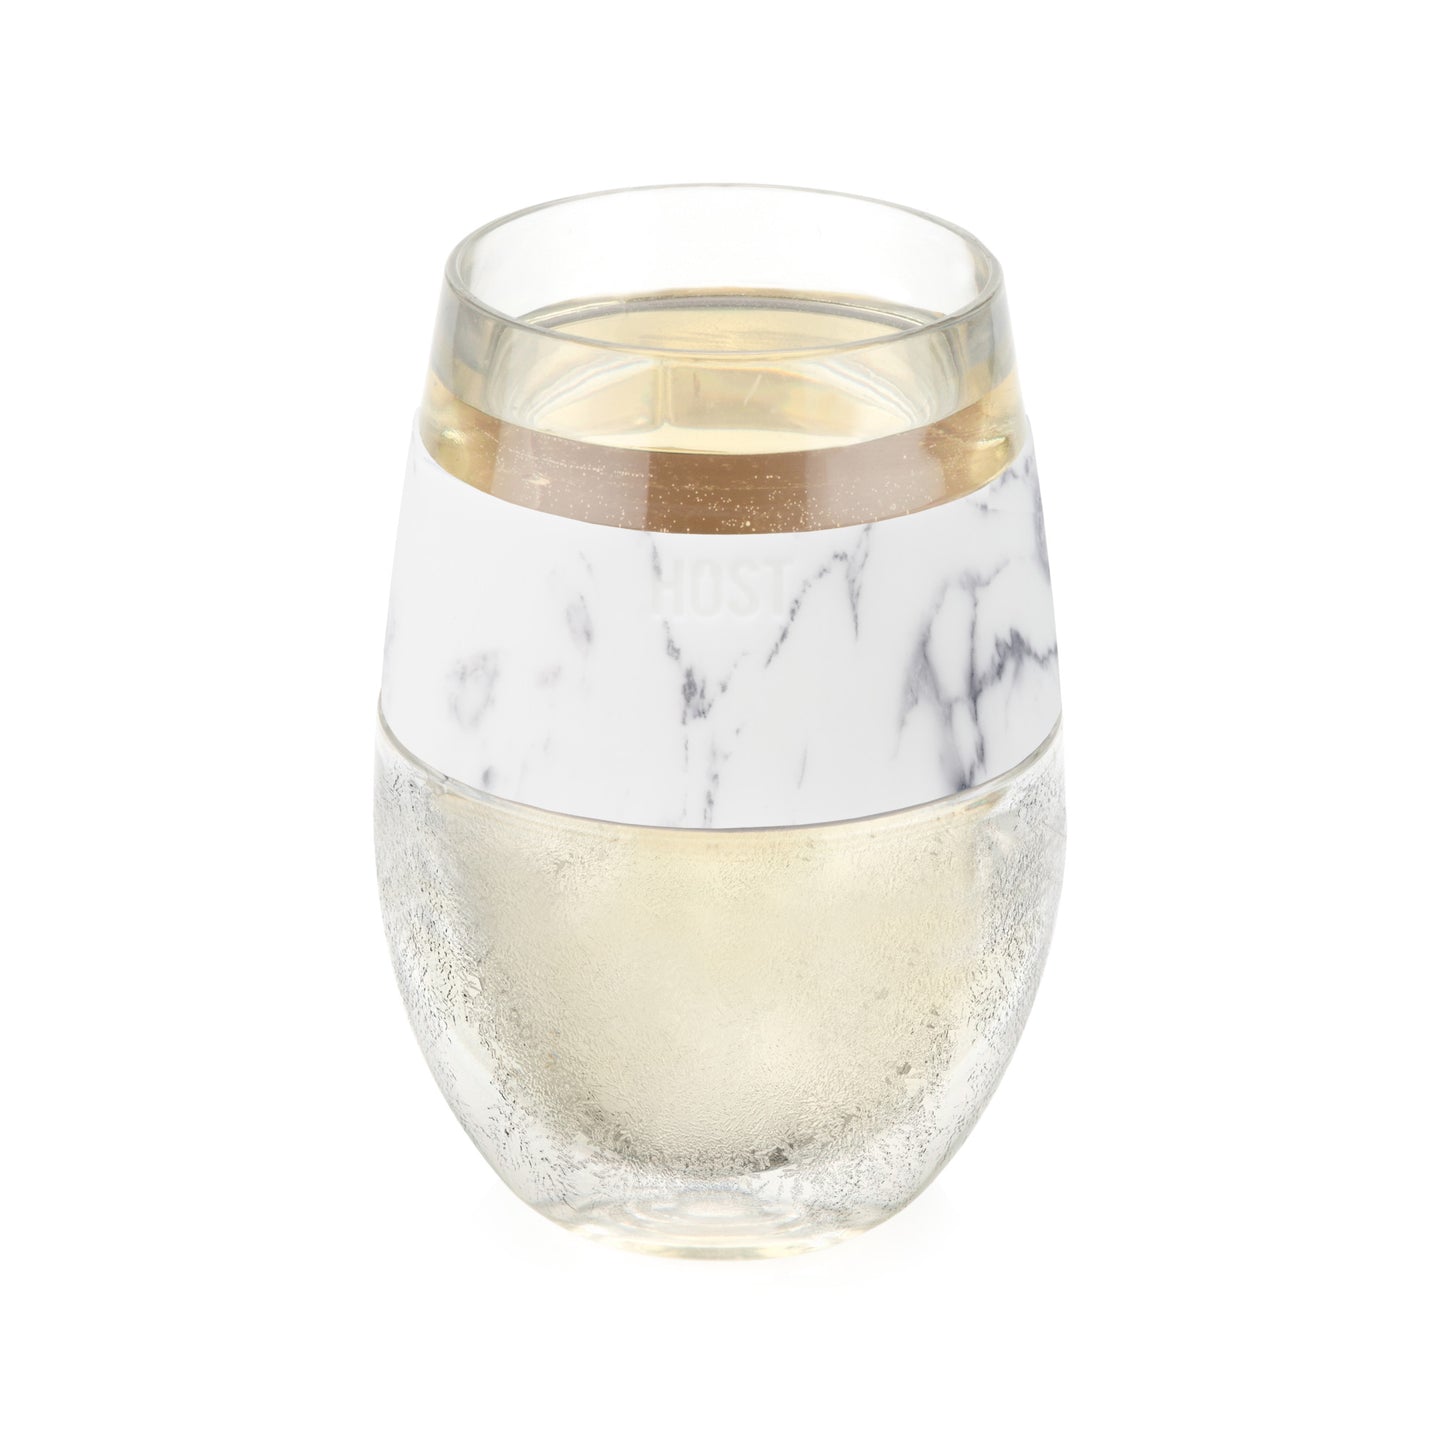 Wine FREEZE™ Cooling Cup in Marble Single